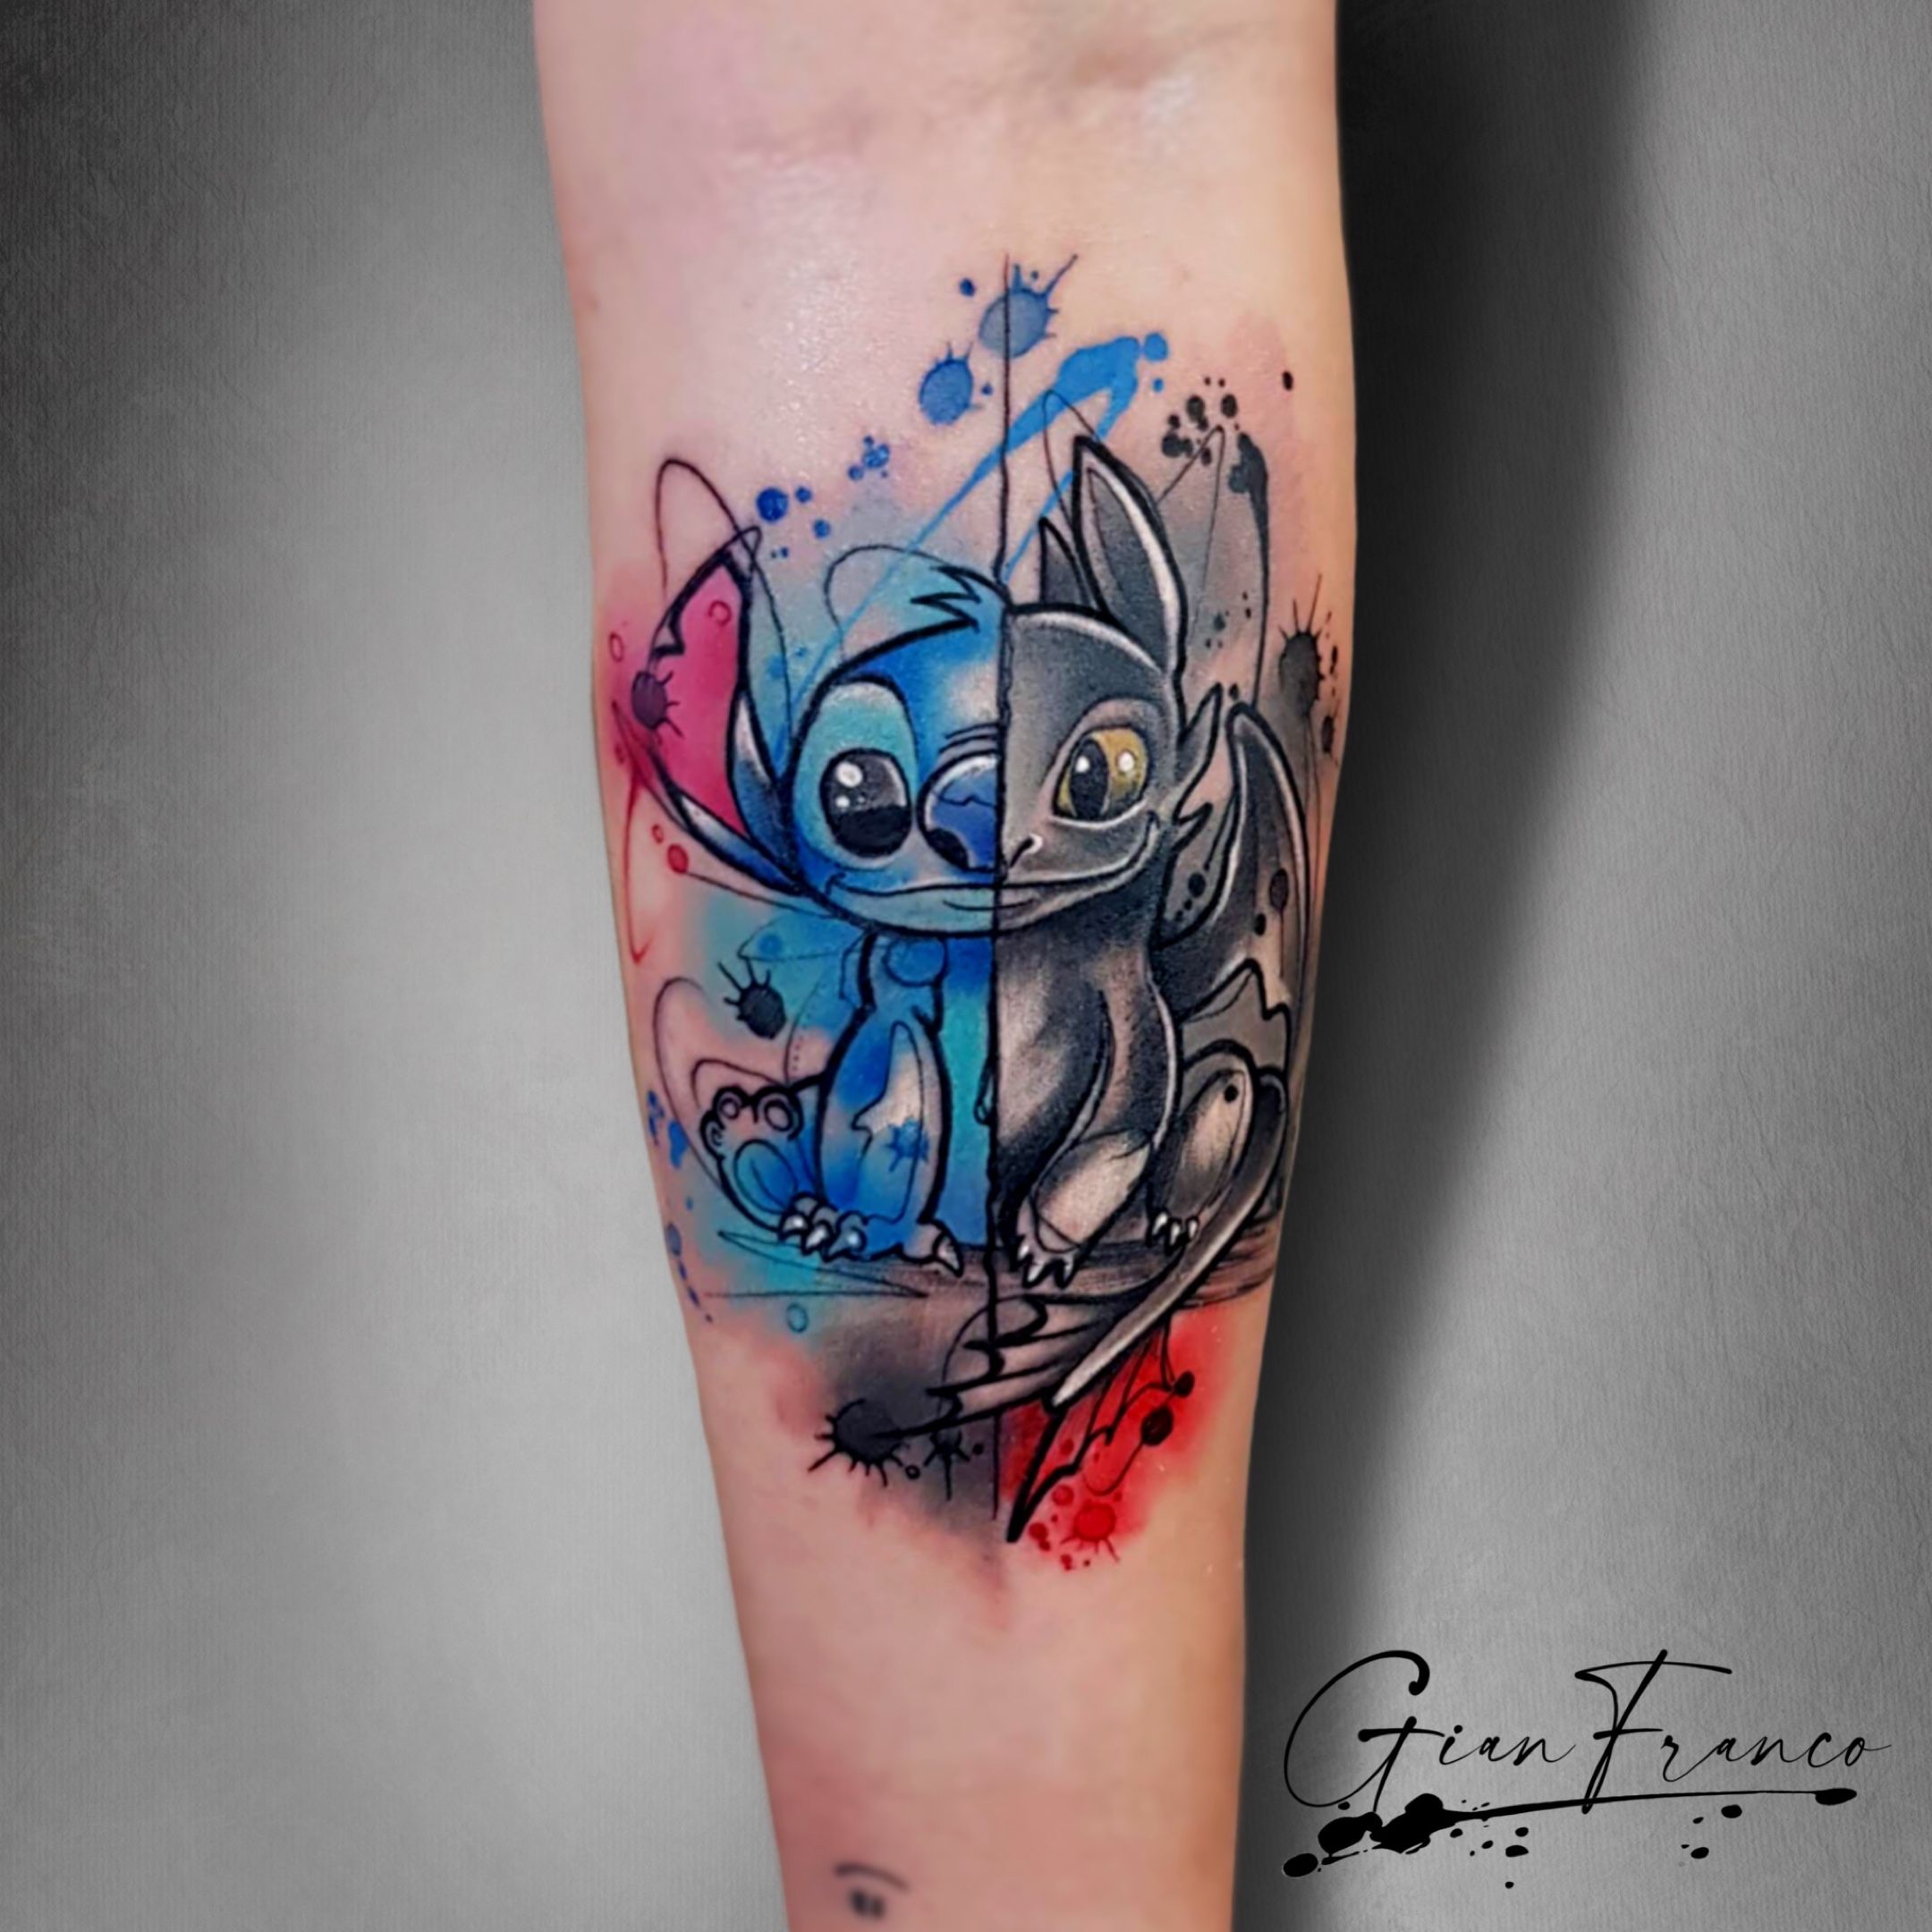 toothless and lilo colour small tattoo lilo stitchhow to train your dragon  kamloops dollys skin art  Stitch tattoo Disney tattoos Lilo and stitch  tattoo